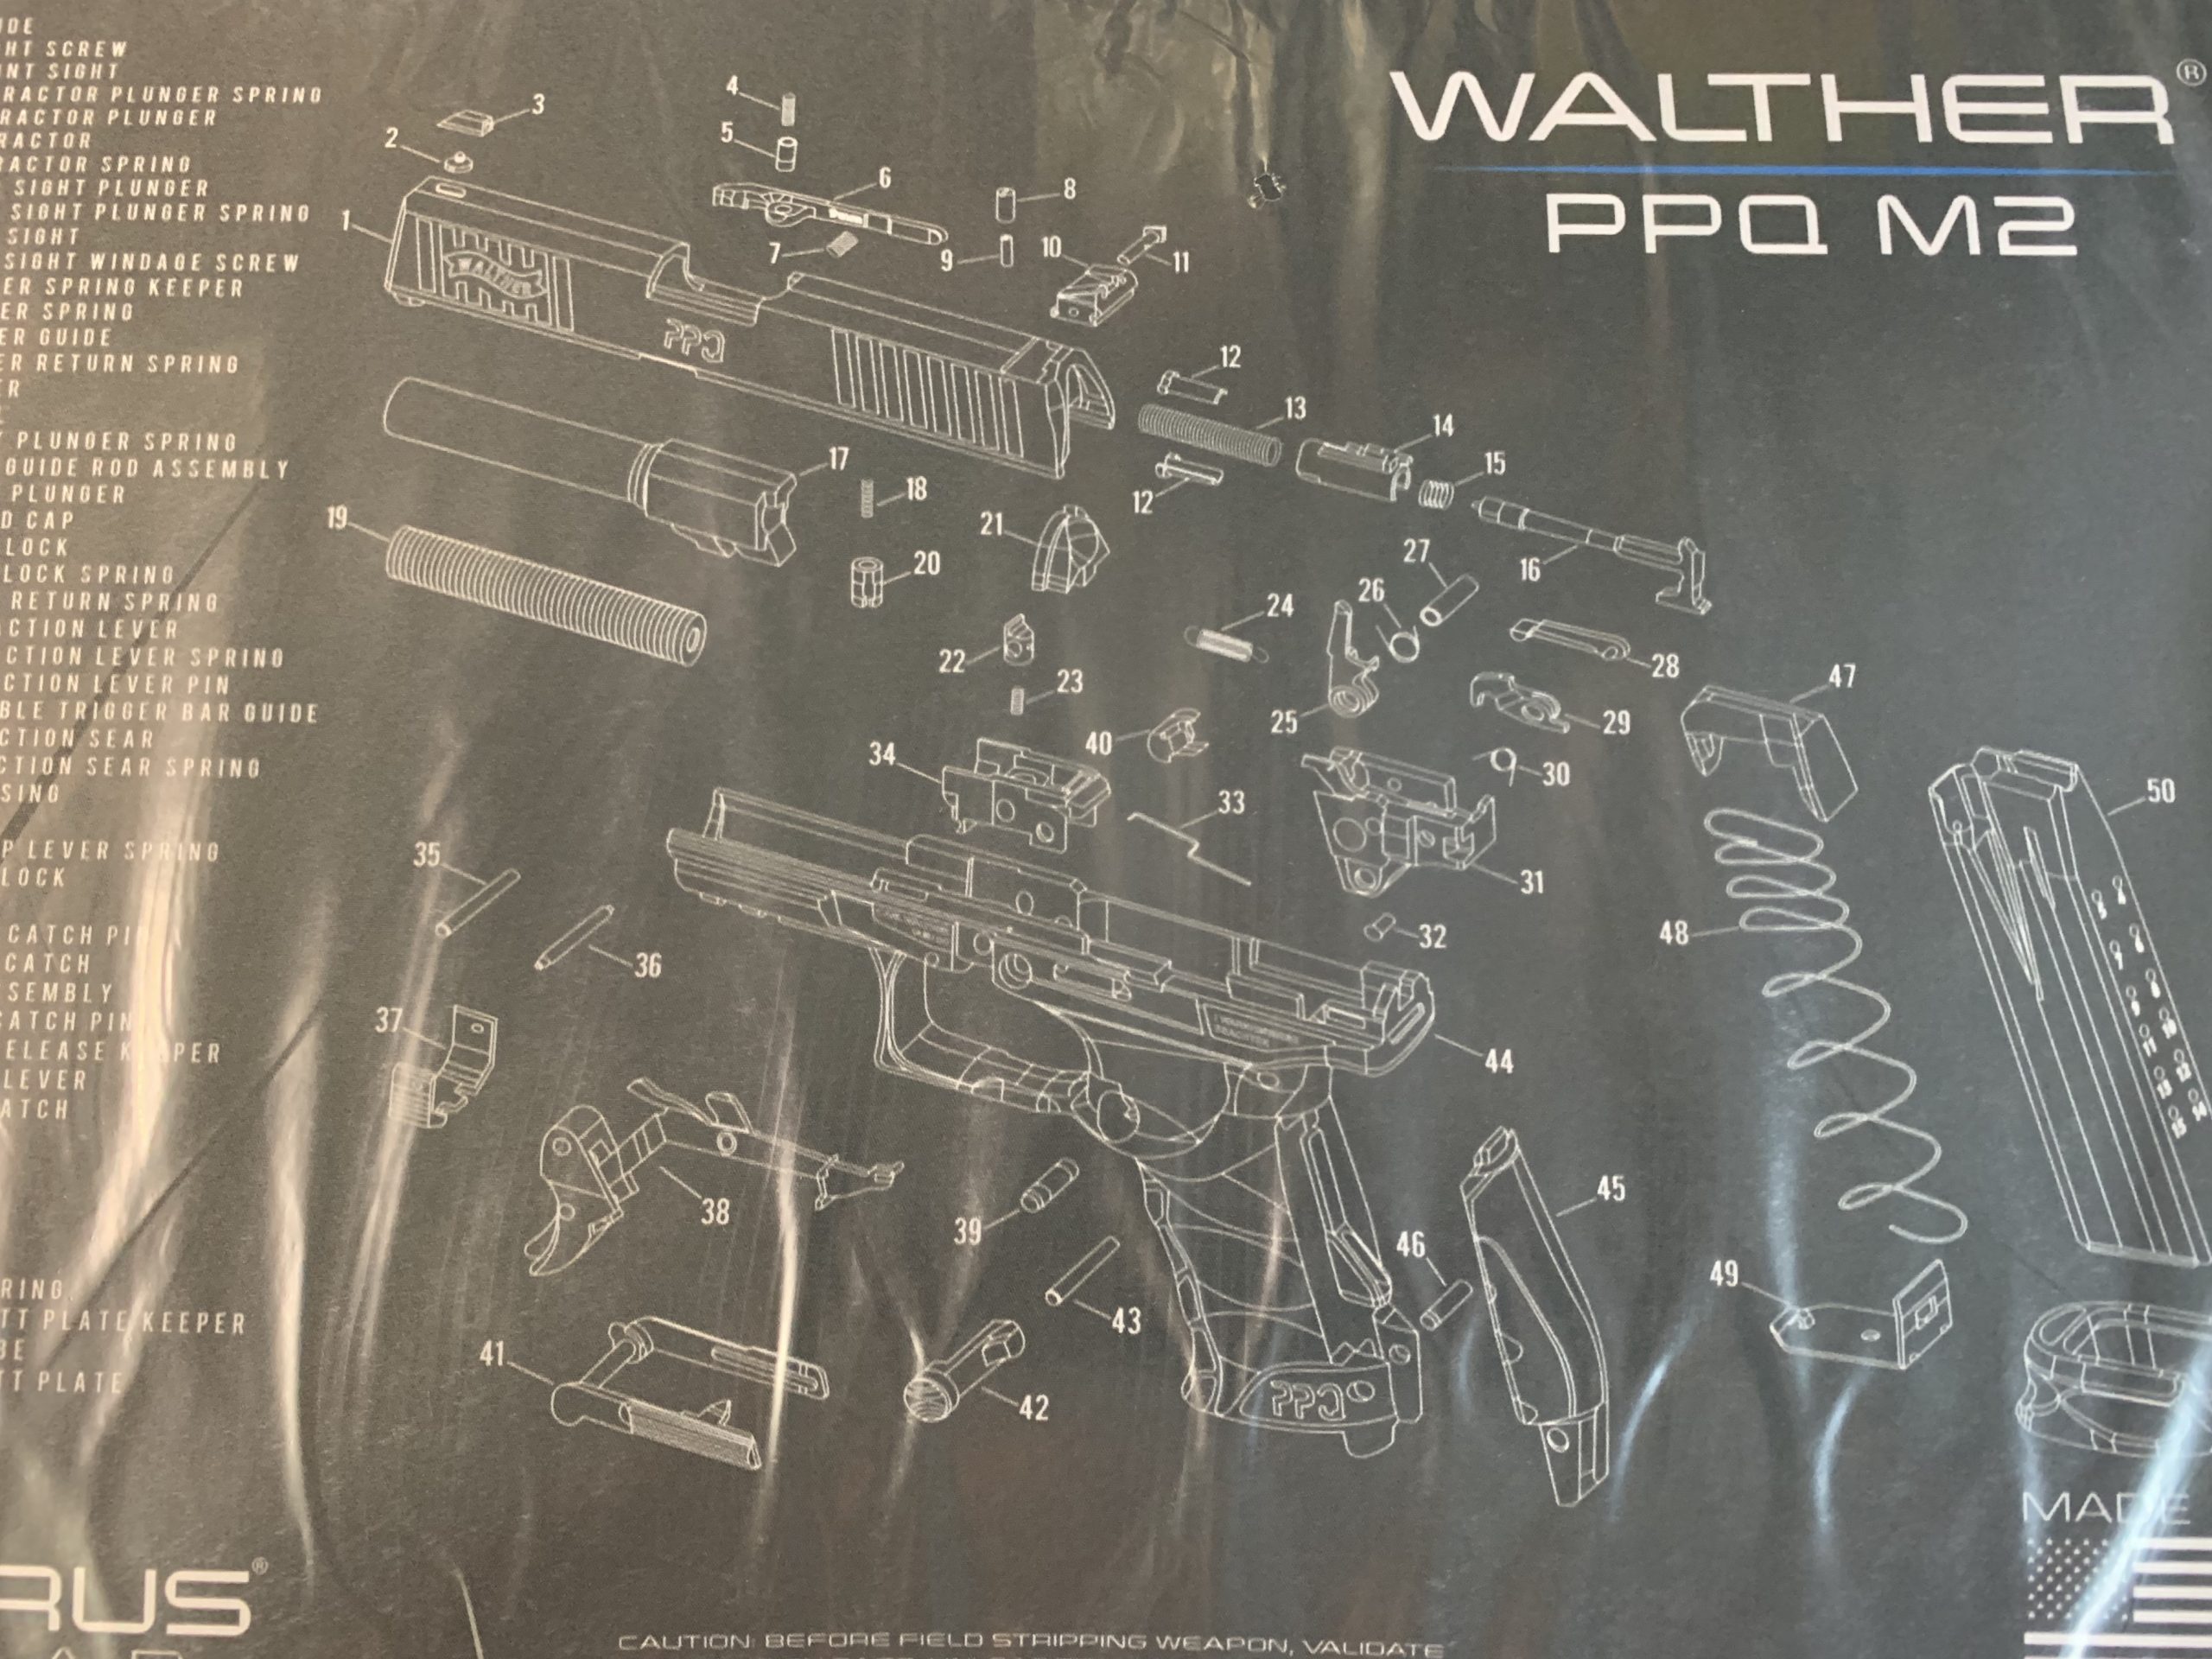 Walther PPQ Mod 2 Schematic Promat grey